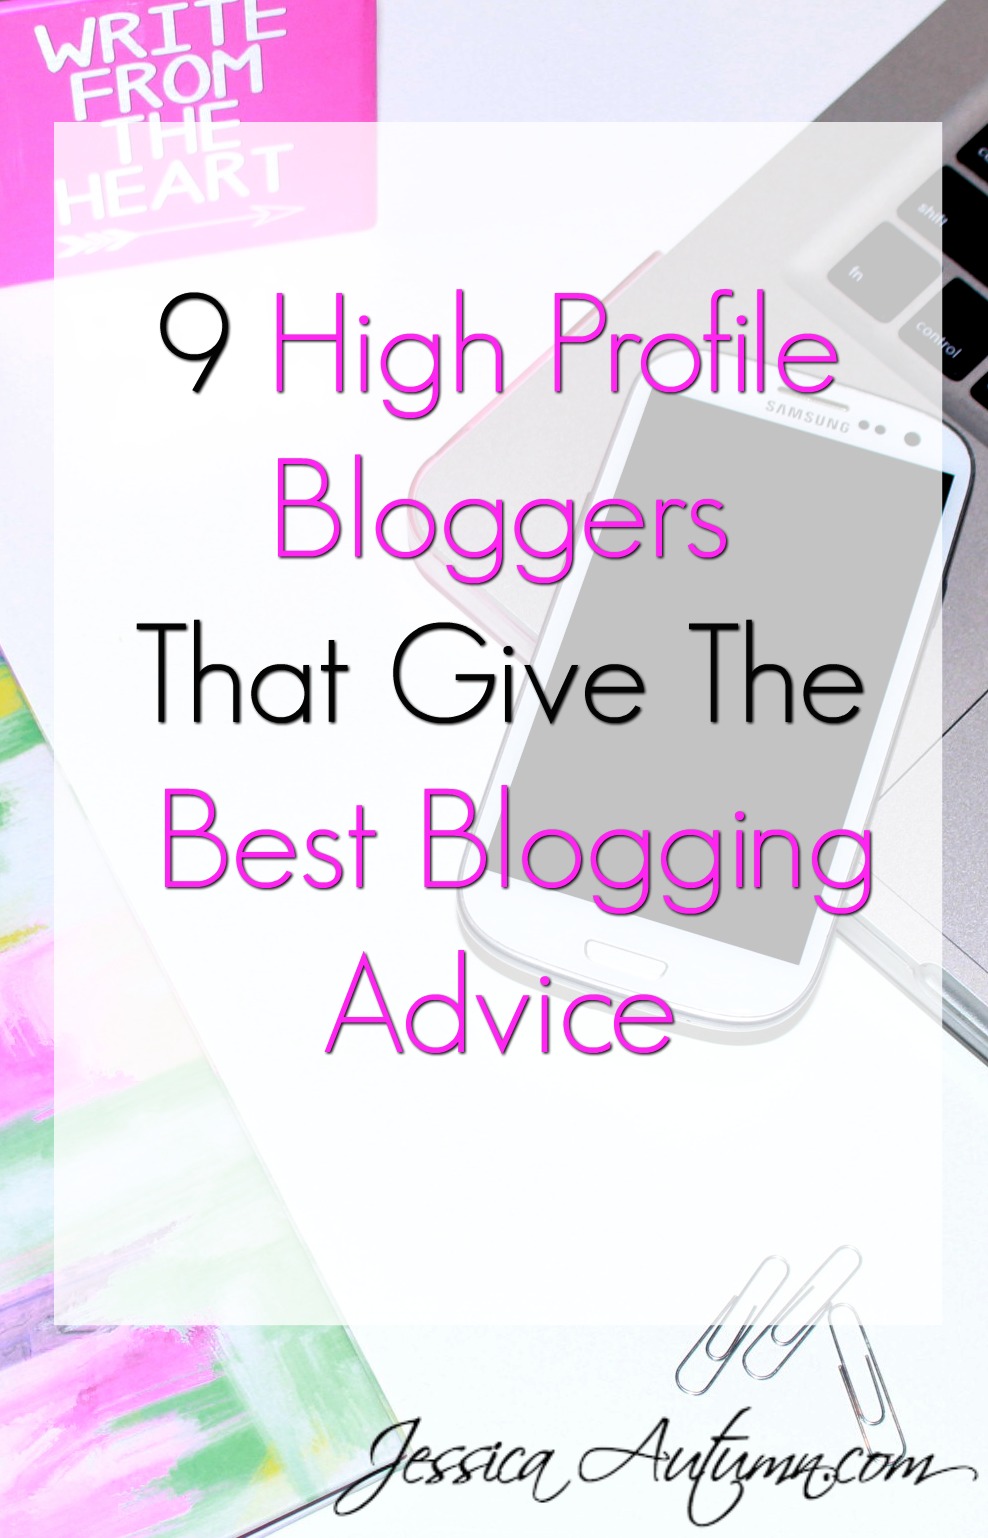 9 high profile bloggers that give the best blogging advice. LOVED THIS! Searching for sites with good blogging tips can be so time-consuming. This is exactly what I have been looking for to help me grow my blog!